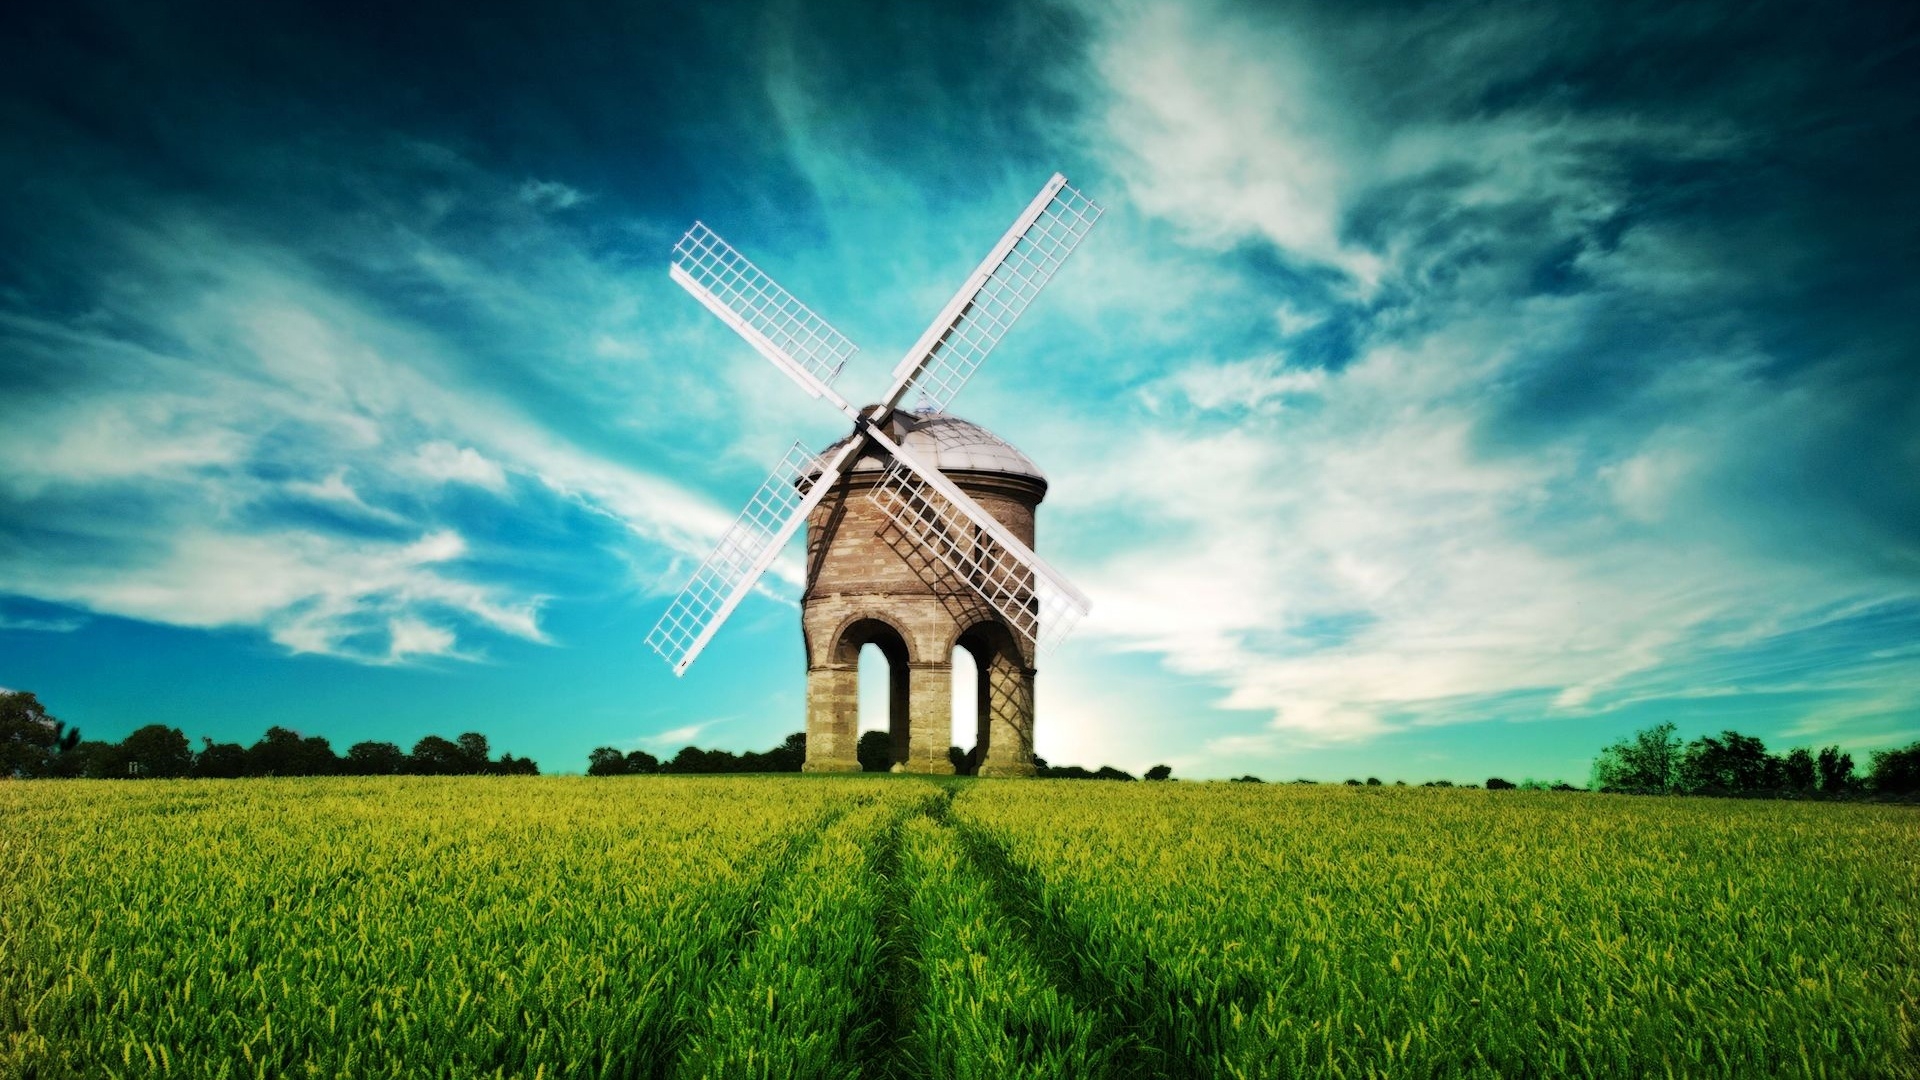 Superb Windmill for 1920 x 1080 HDTV 1080p resolution